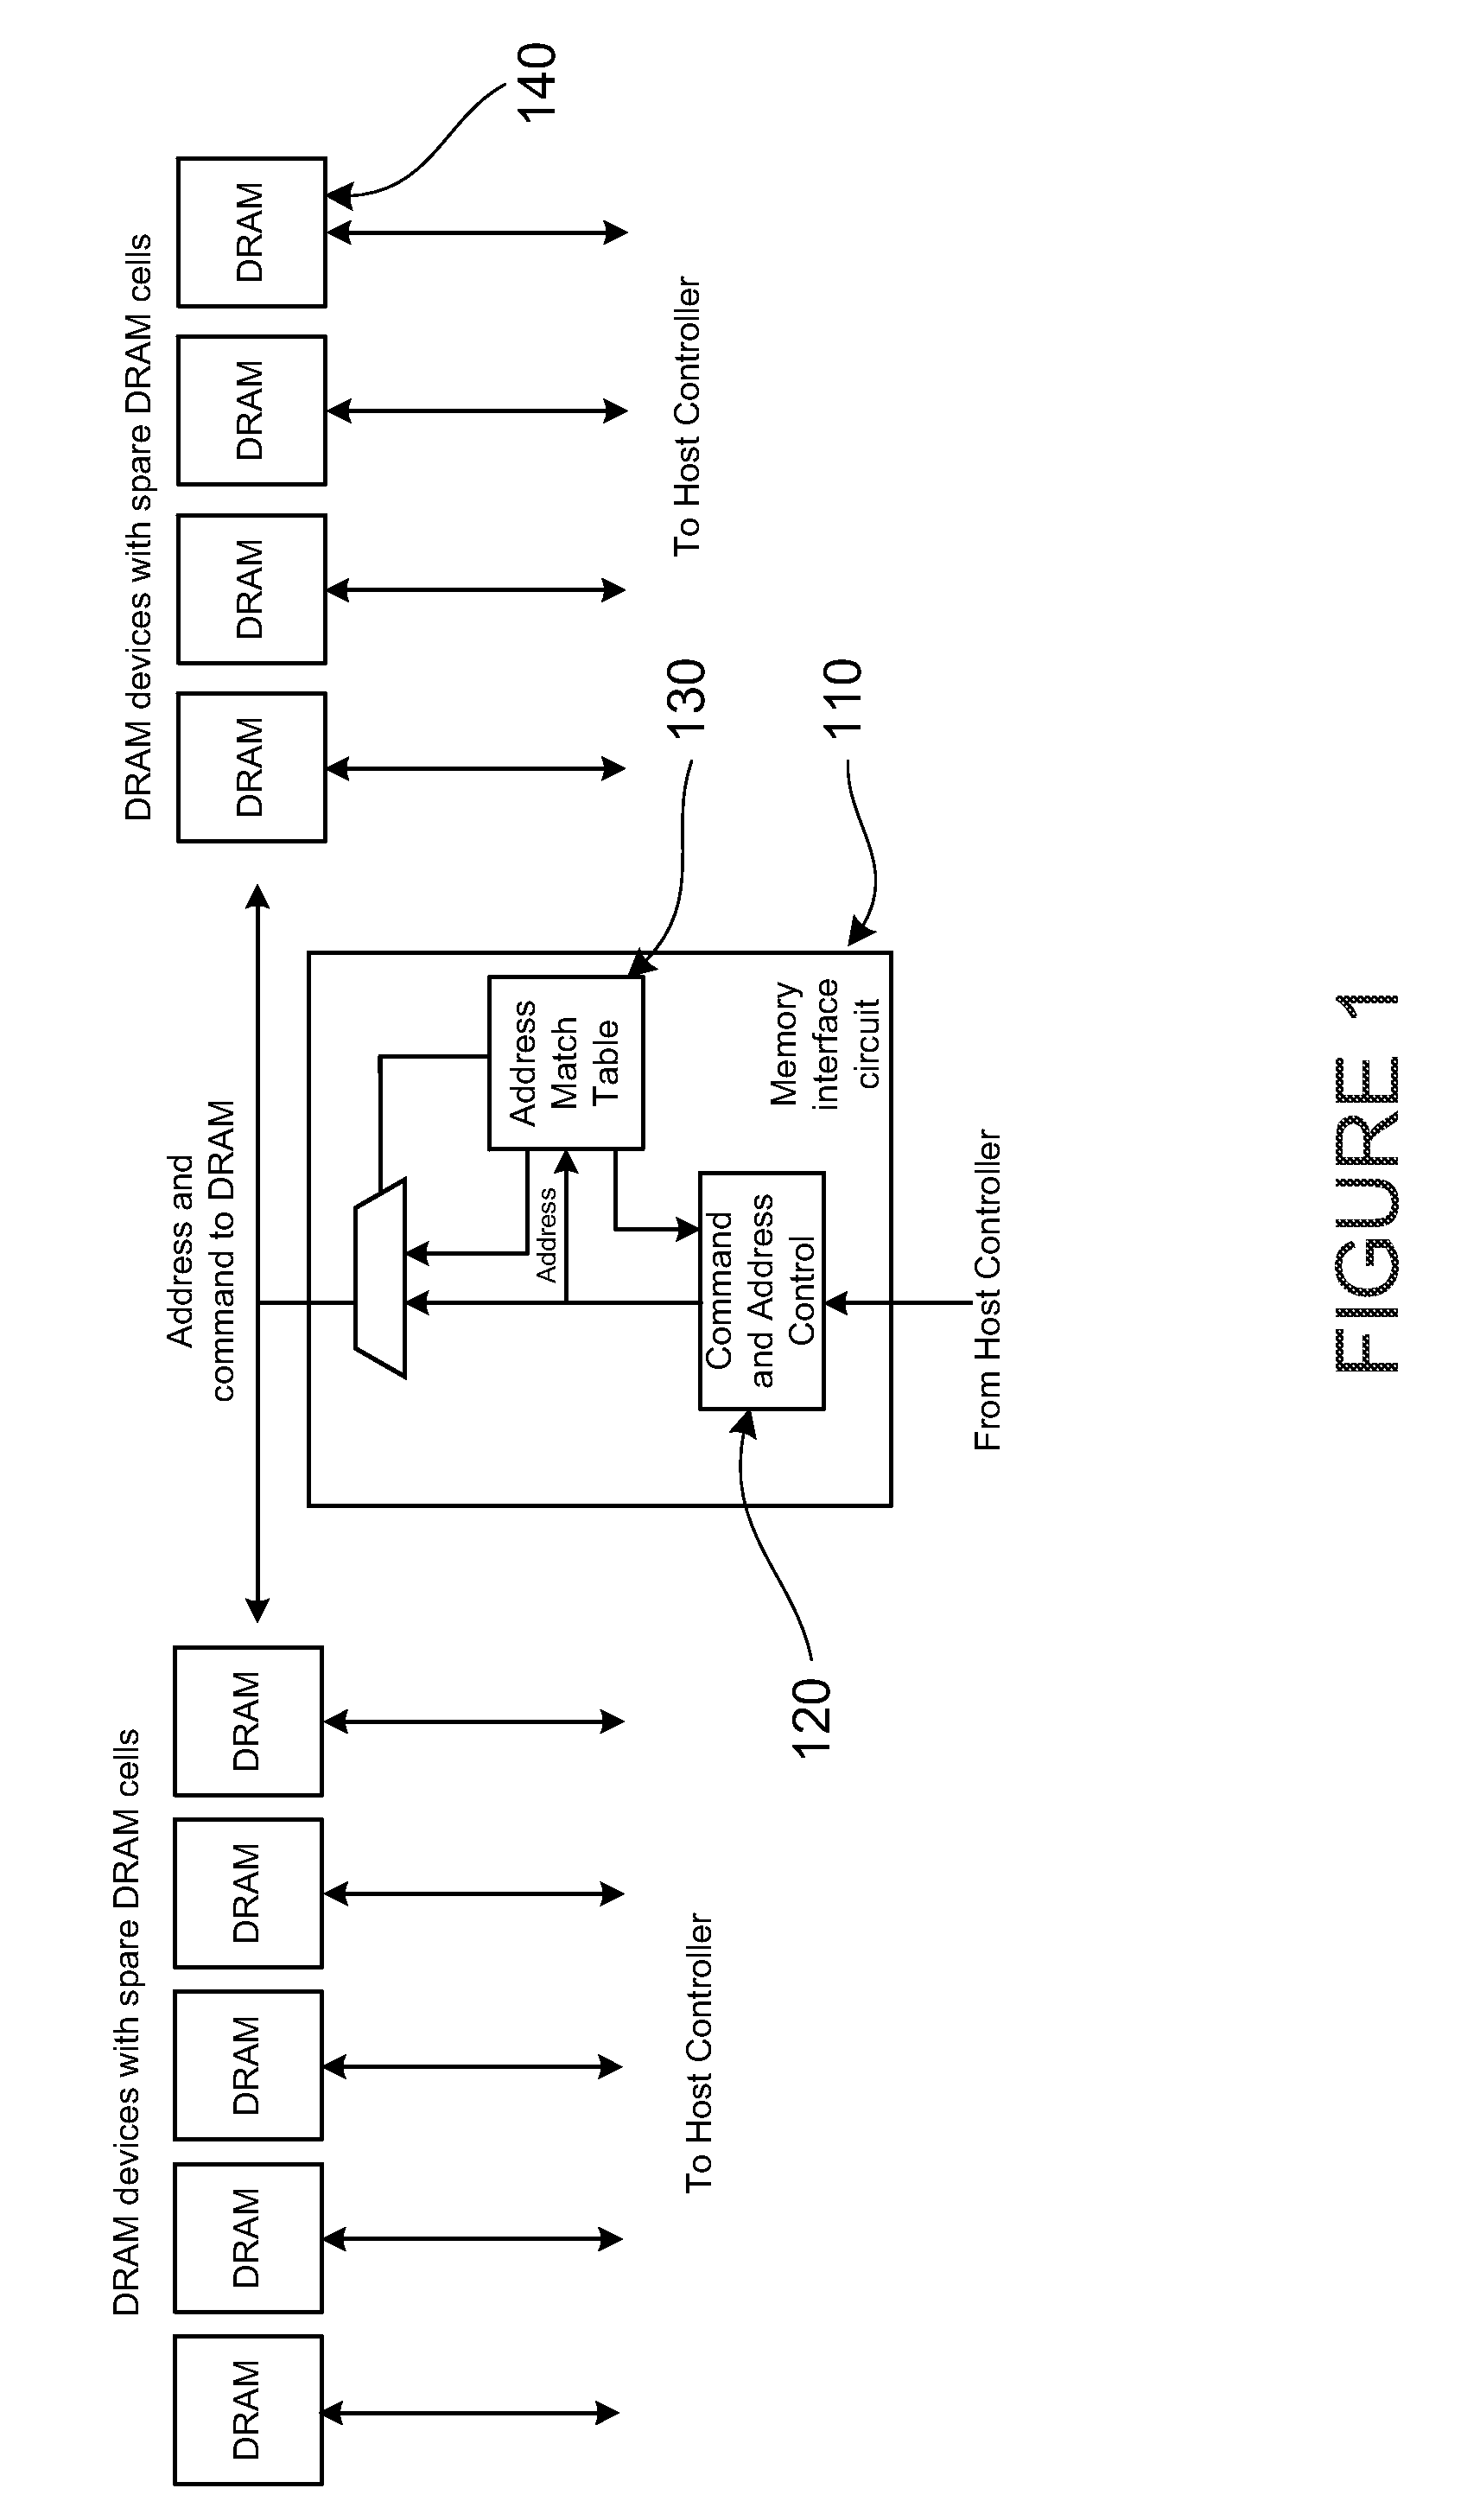 Content matching using a multi-hash function for replacement of a faulty memory cell